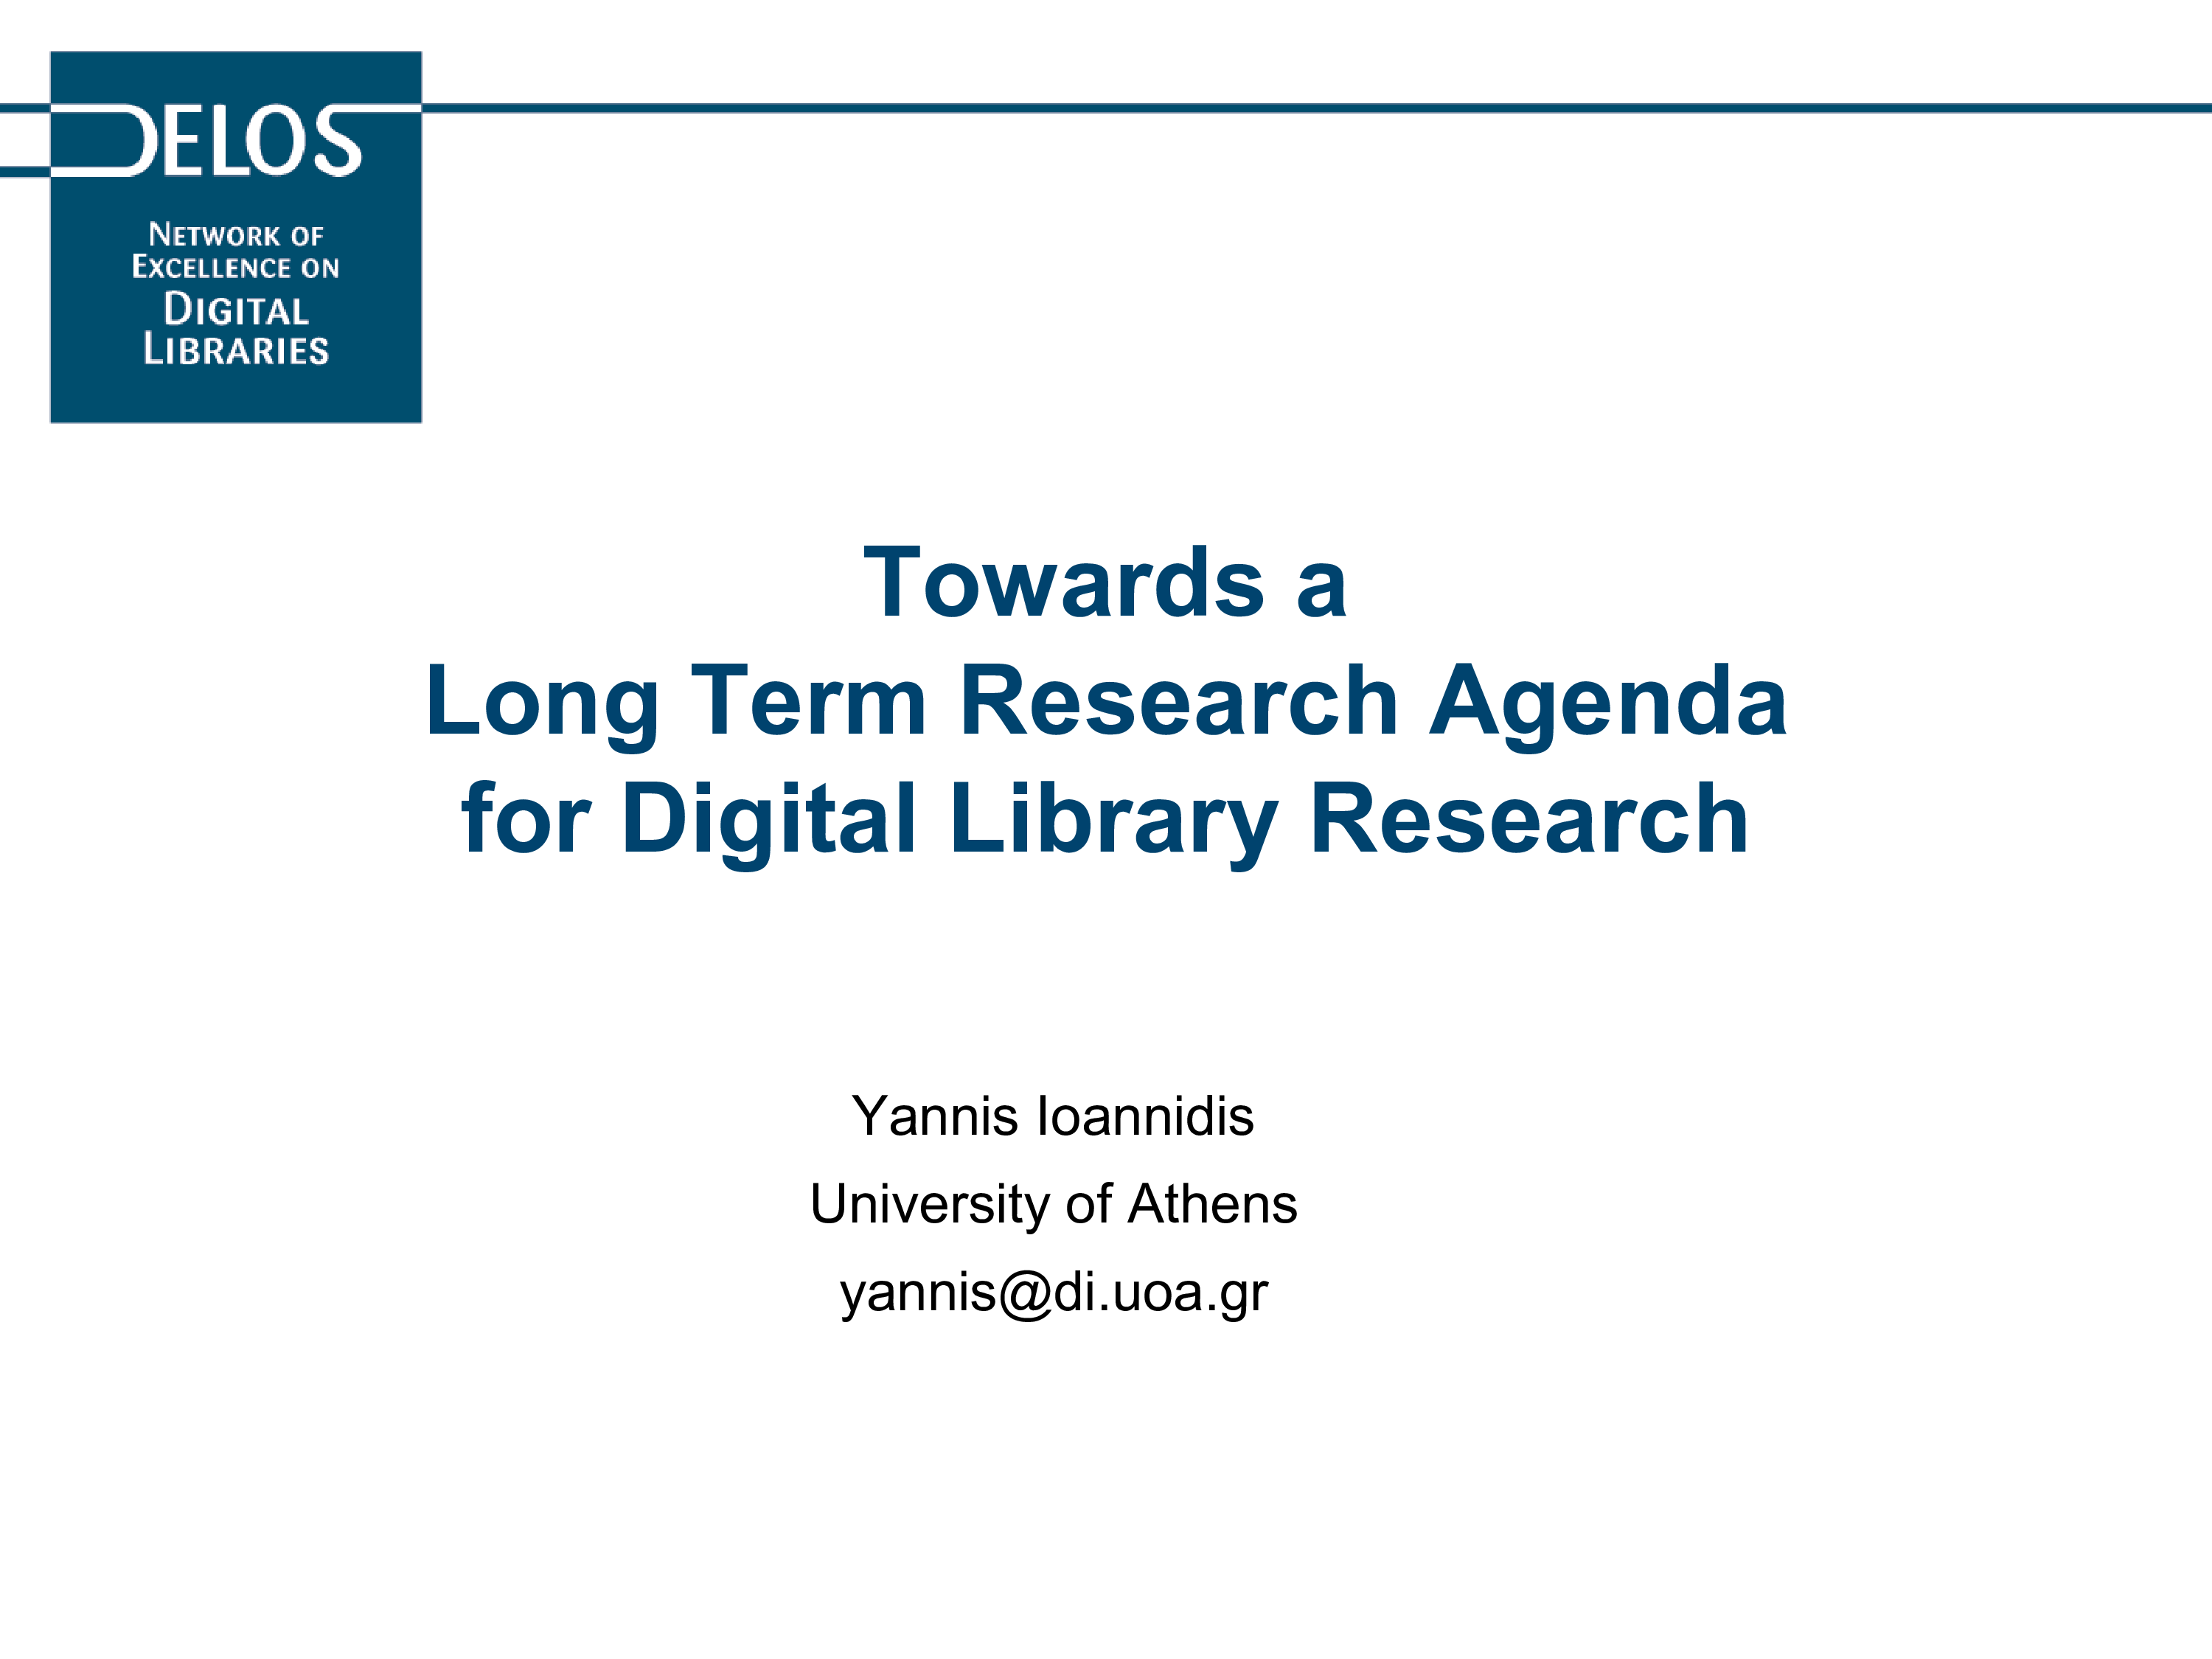 Library Research Agenda main image